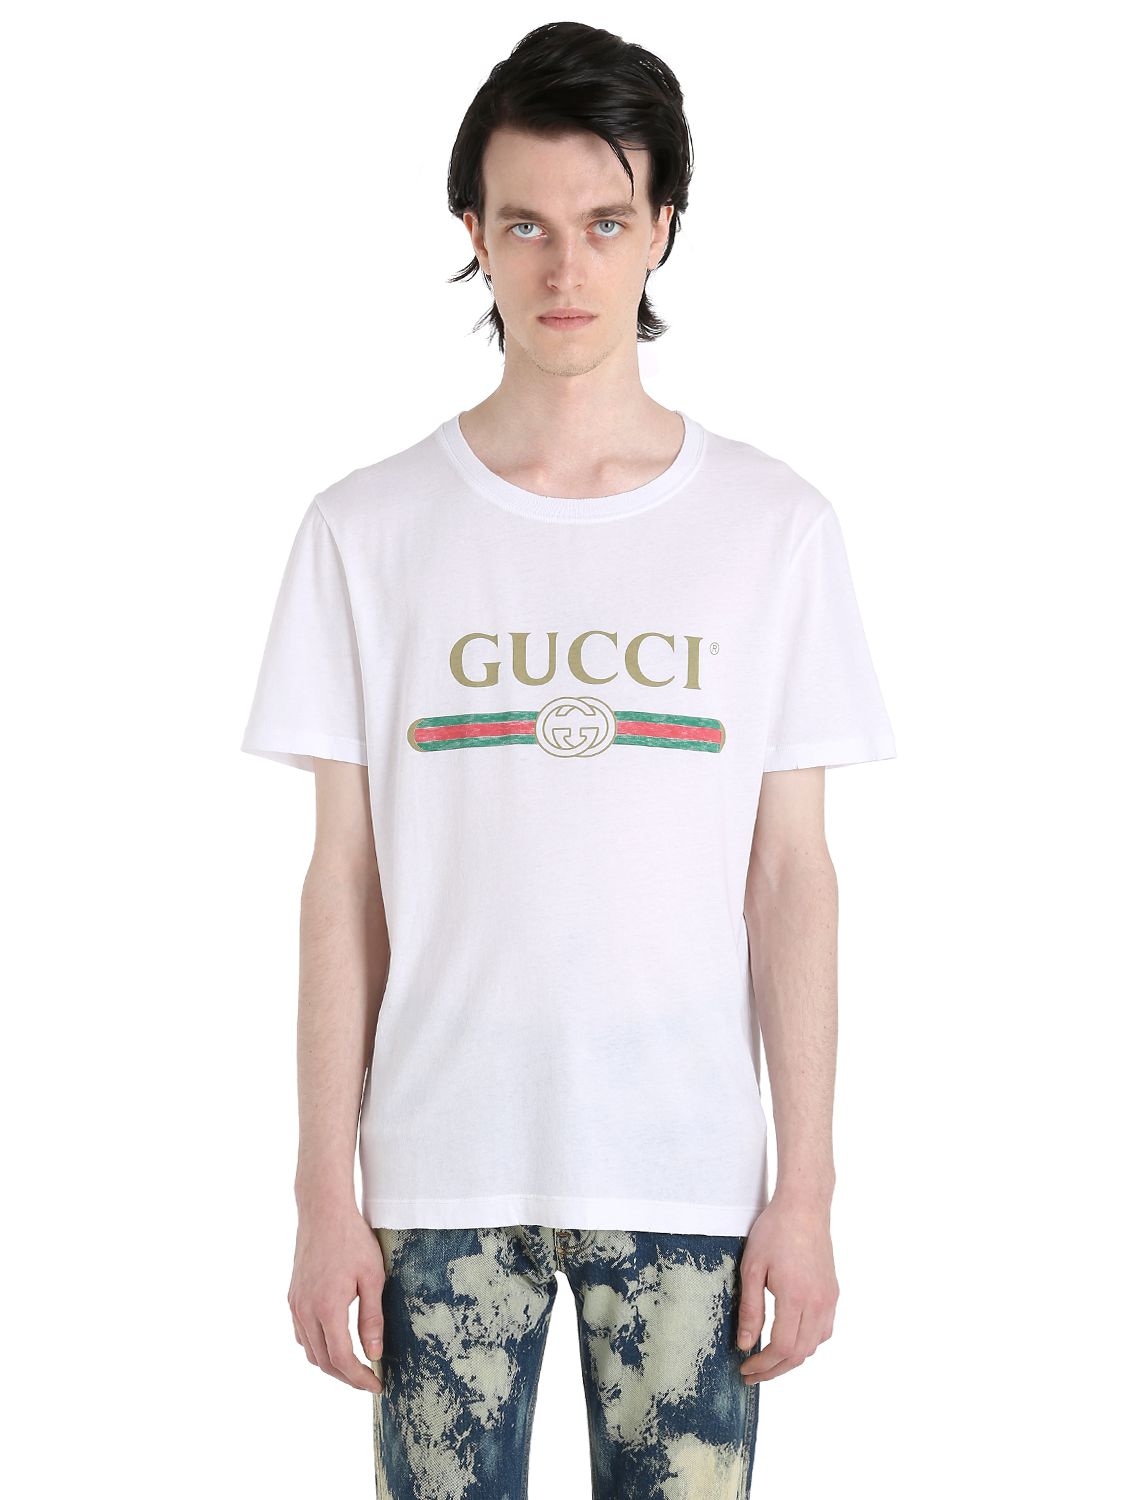 gucci t shirt made in turkey